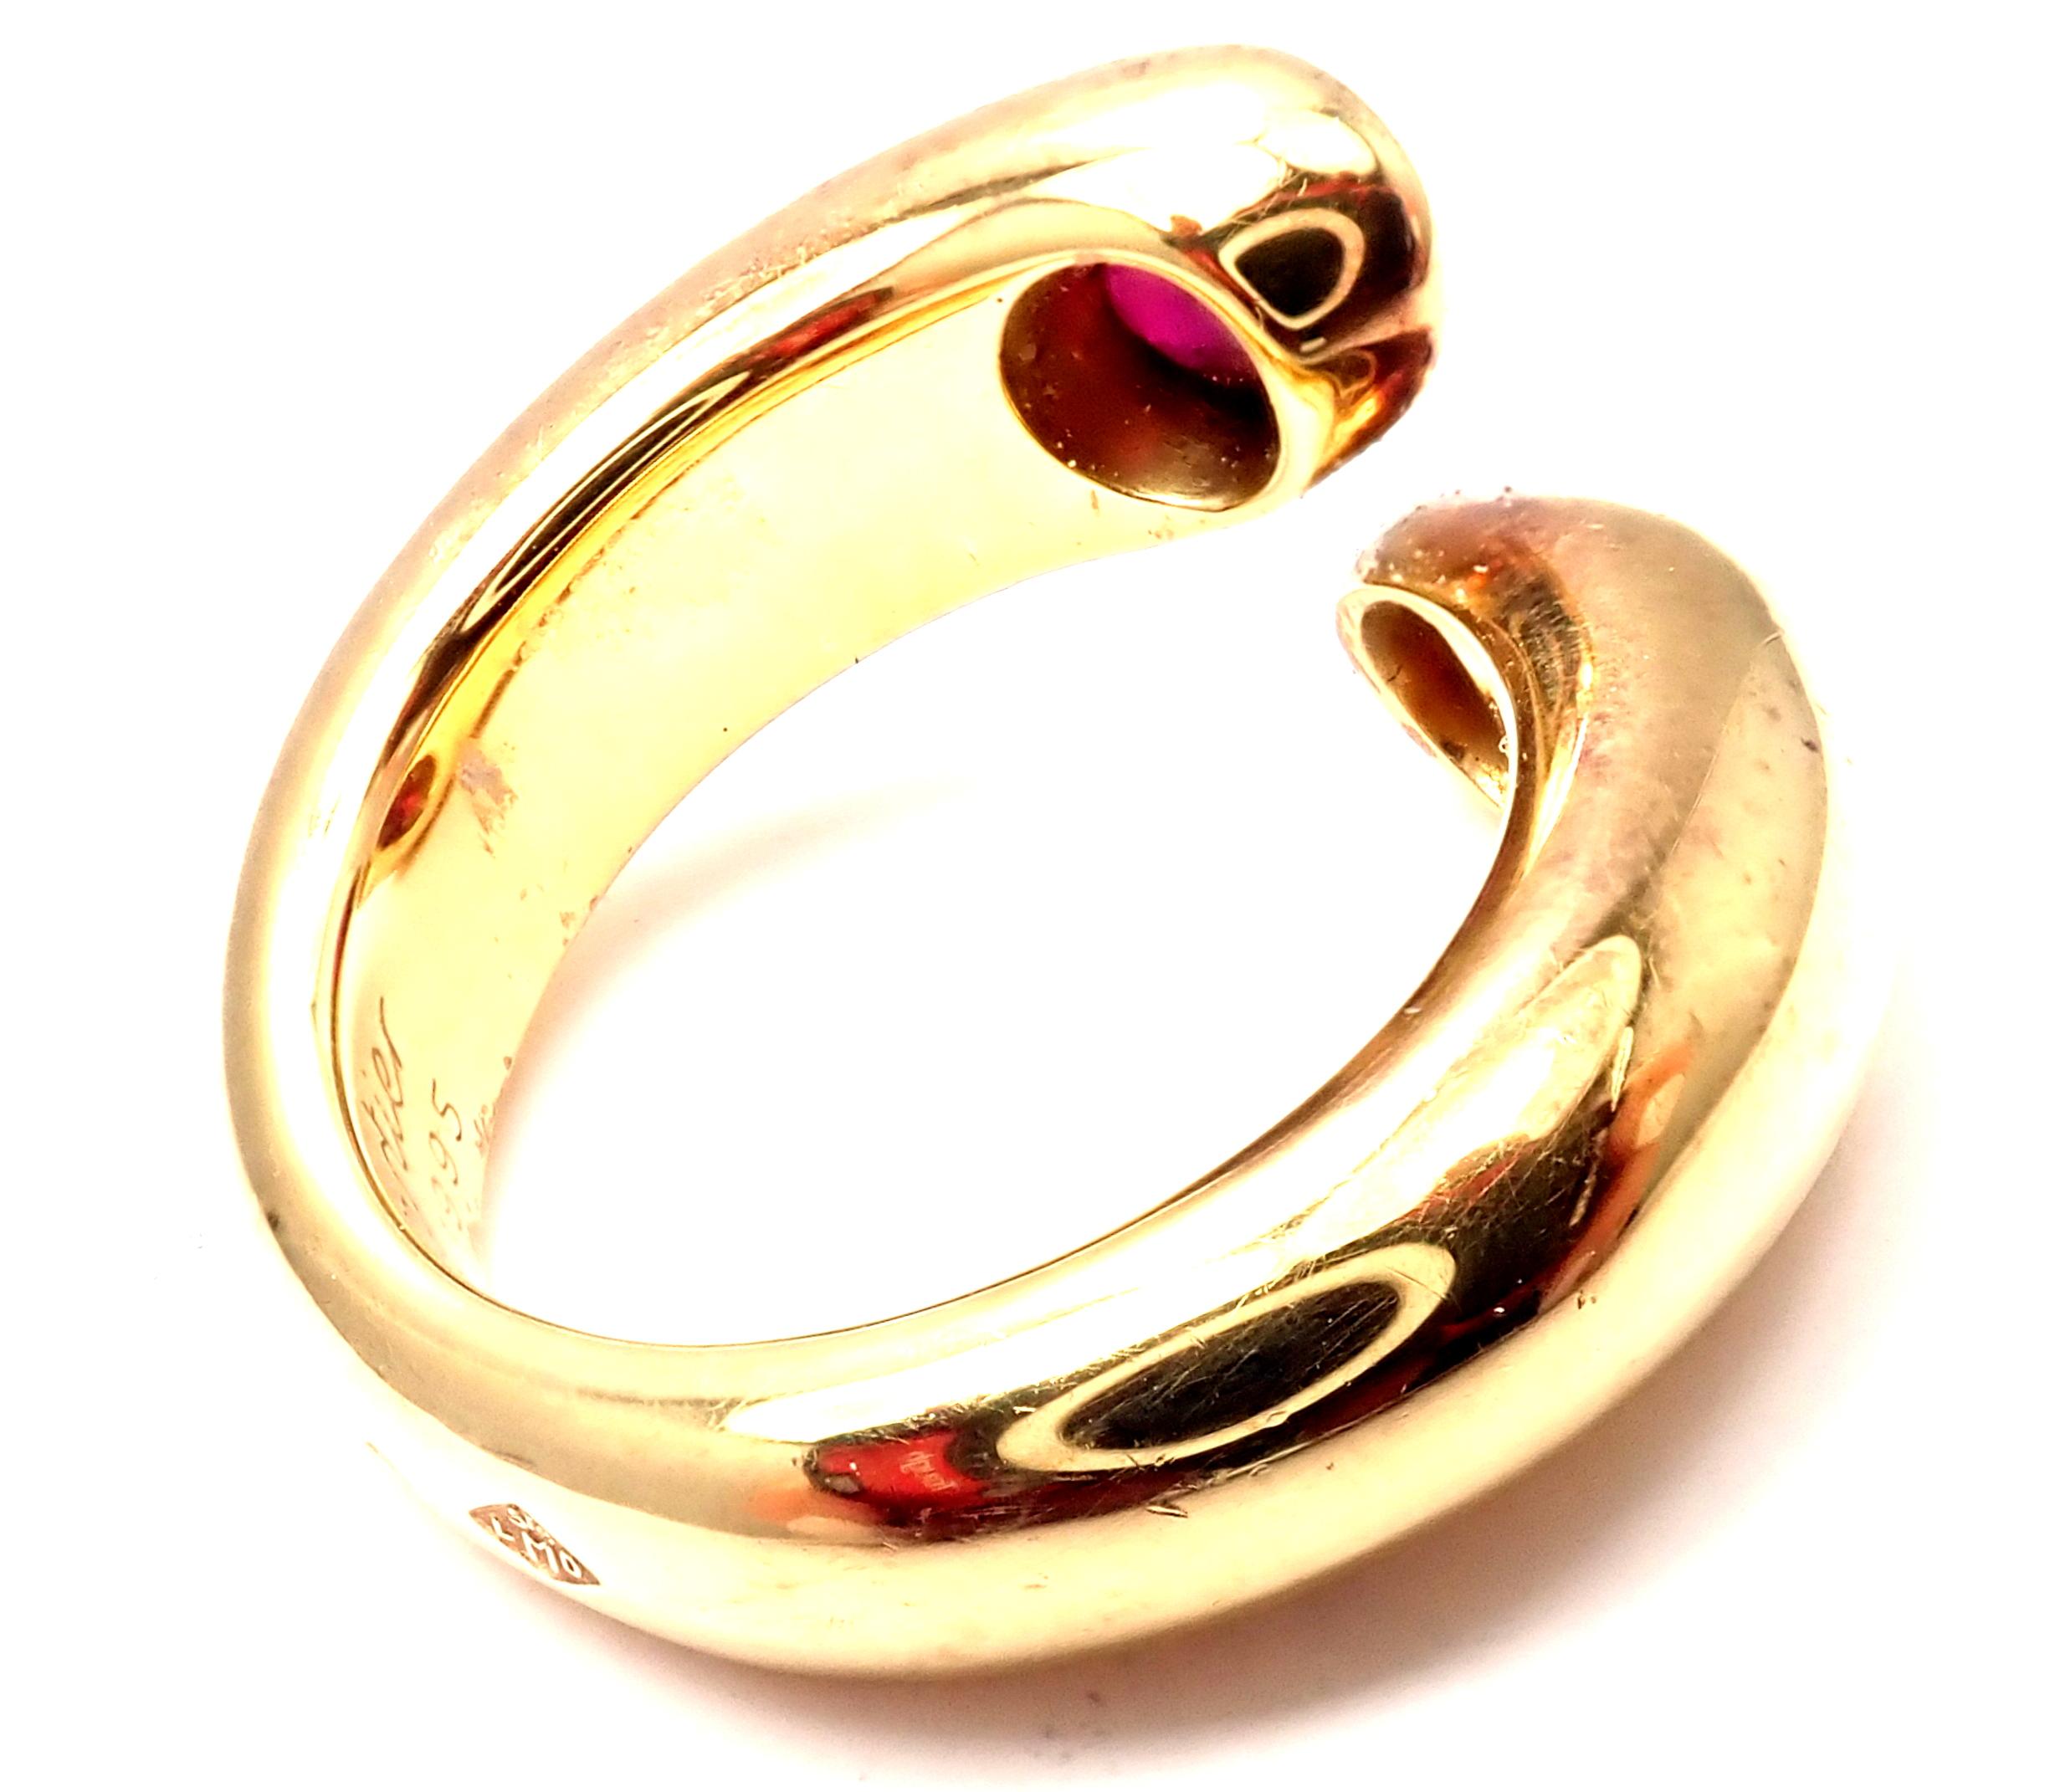 18k Yellow Gold Ellipse Deux Tetes Croisees Bypass Ruby Band Ring by Cartier.
With 2 oval cut rubies, approx 1.20ct
Metal: 18k Yellow Gold
Band Width: 9mm
Weight: 11.7 grams
European 46, US 3 3/4
Hallmarks: Cartier 750 46 1995 D 14405
YOUR PRICE: